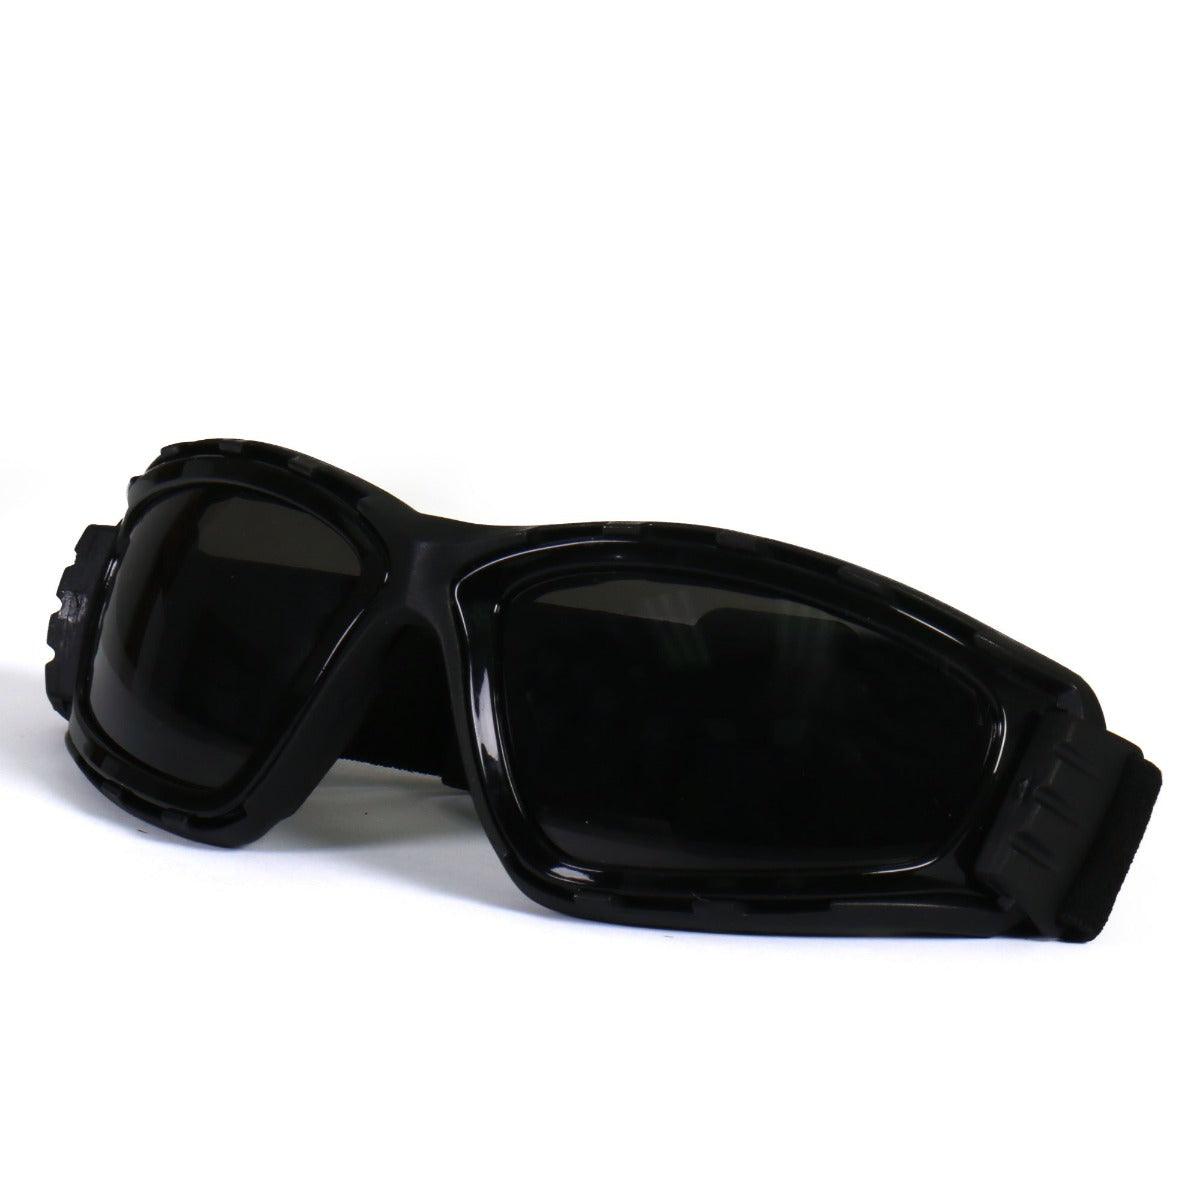 Hot Leathers Safety Shooter Safety Goggles - Smoke Lenses - American Legend Rider